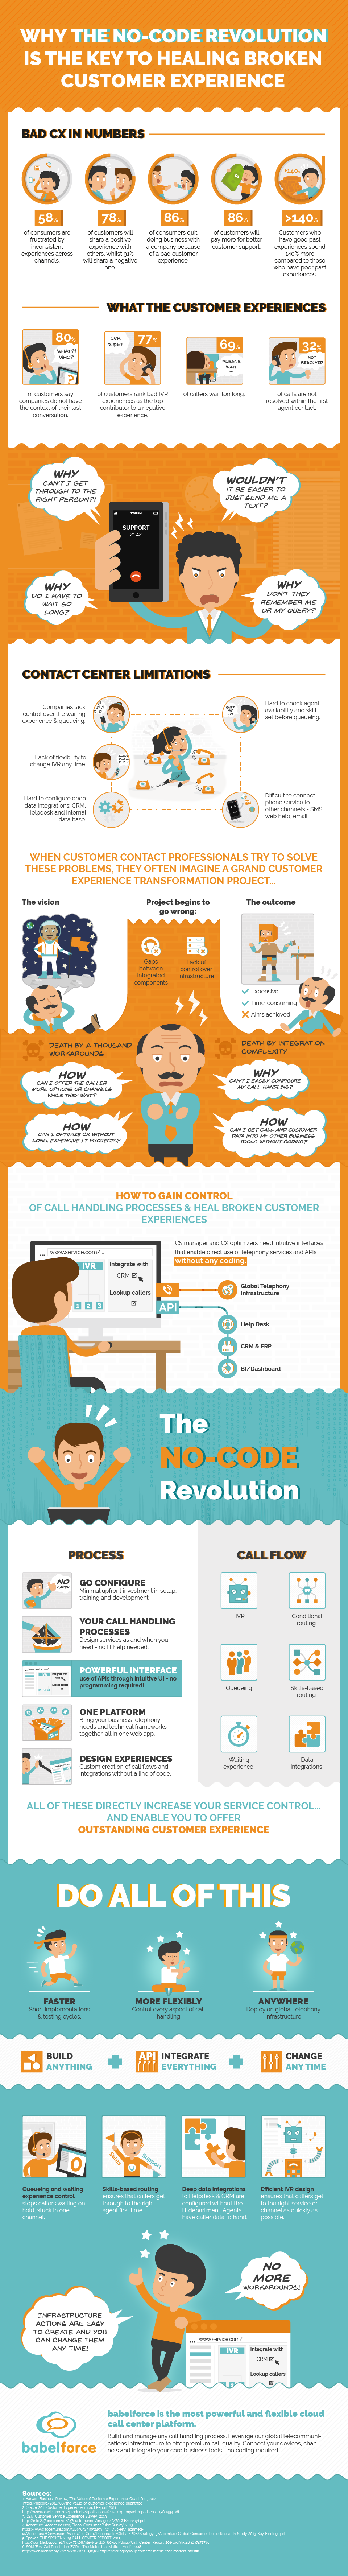 [Infographic] The NO Code Revolution: How to Heal Broken Customer Experiences